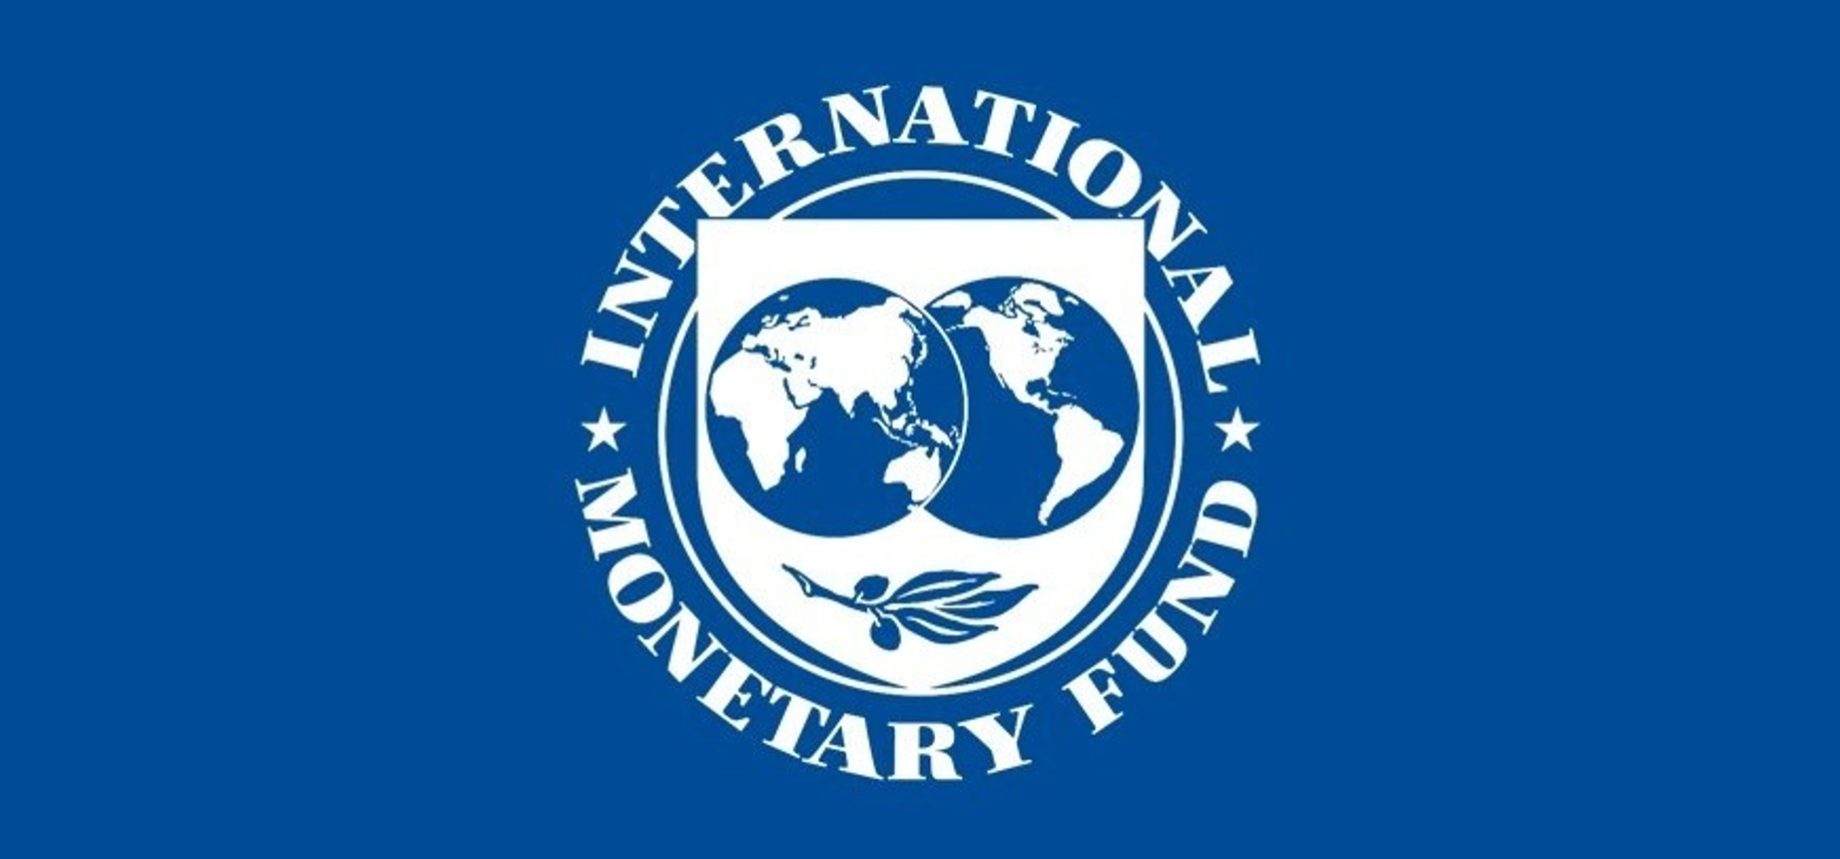 Global govt debt to climb well above pre-pandemic levels in 2022: IMF